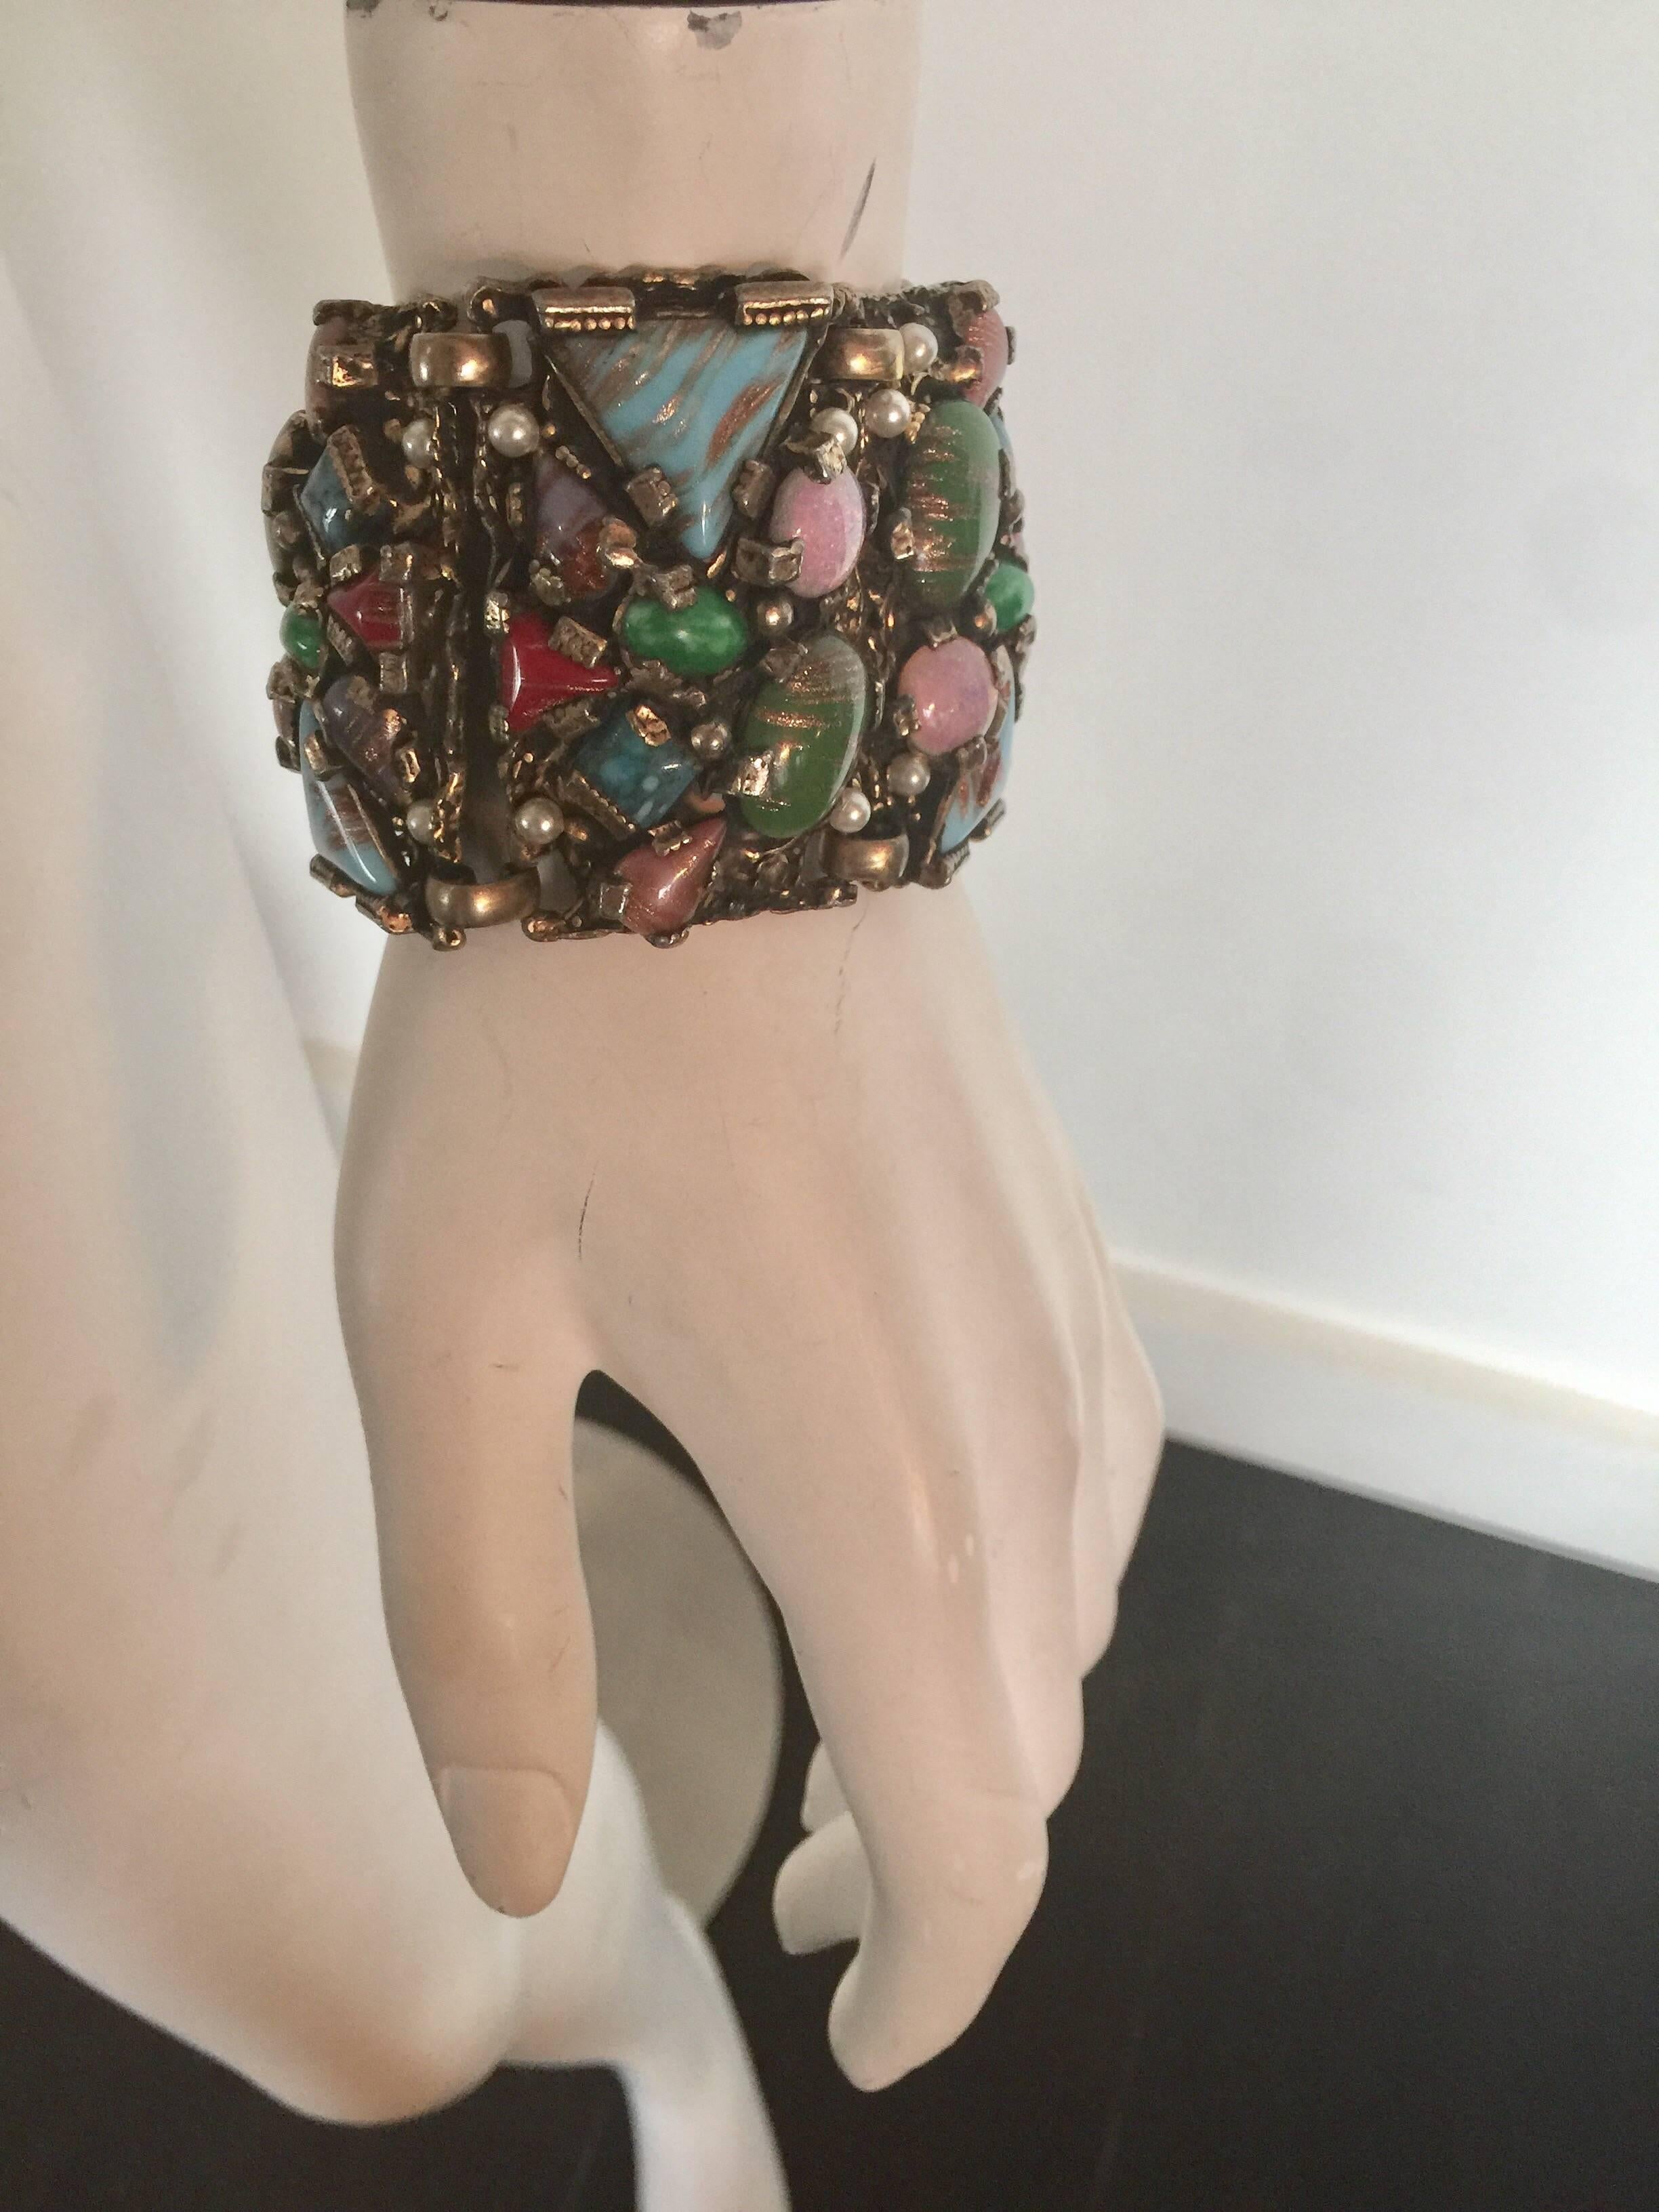 This large, chunky silver-tone bracelet looks like it may have once been gold plated.  The colored stones have a metallic element to them and faux pearls.  